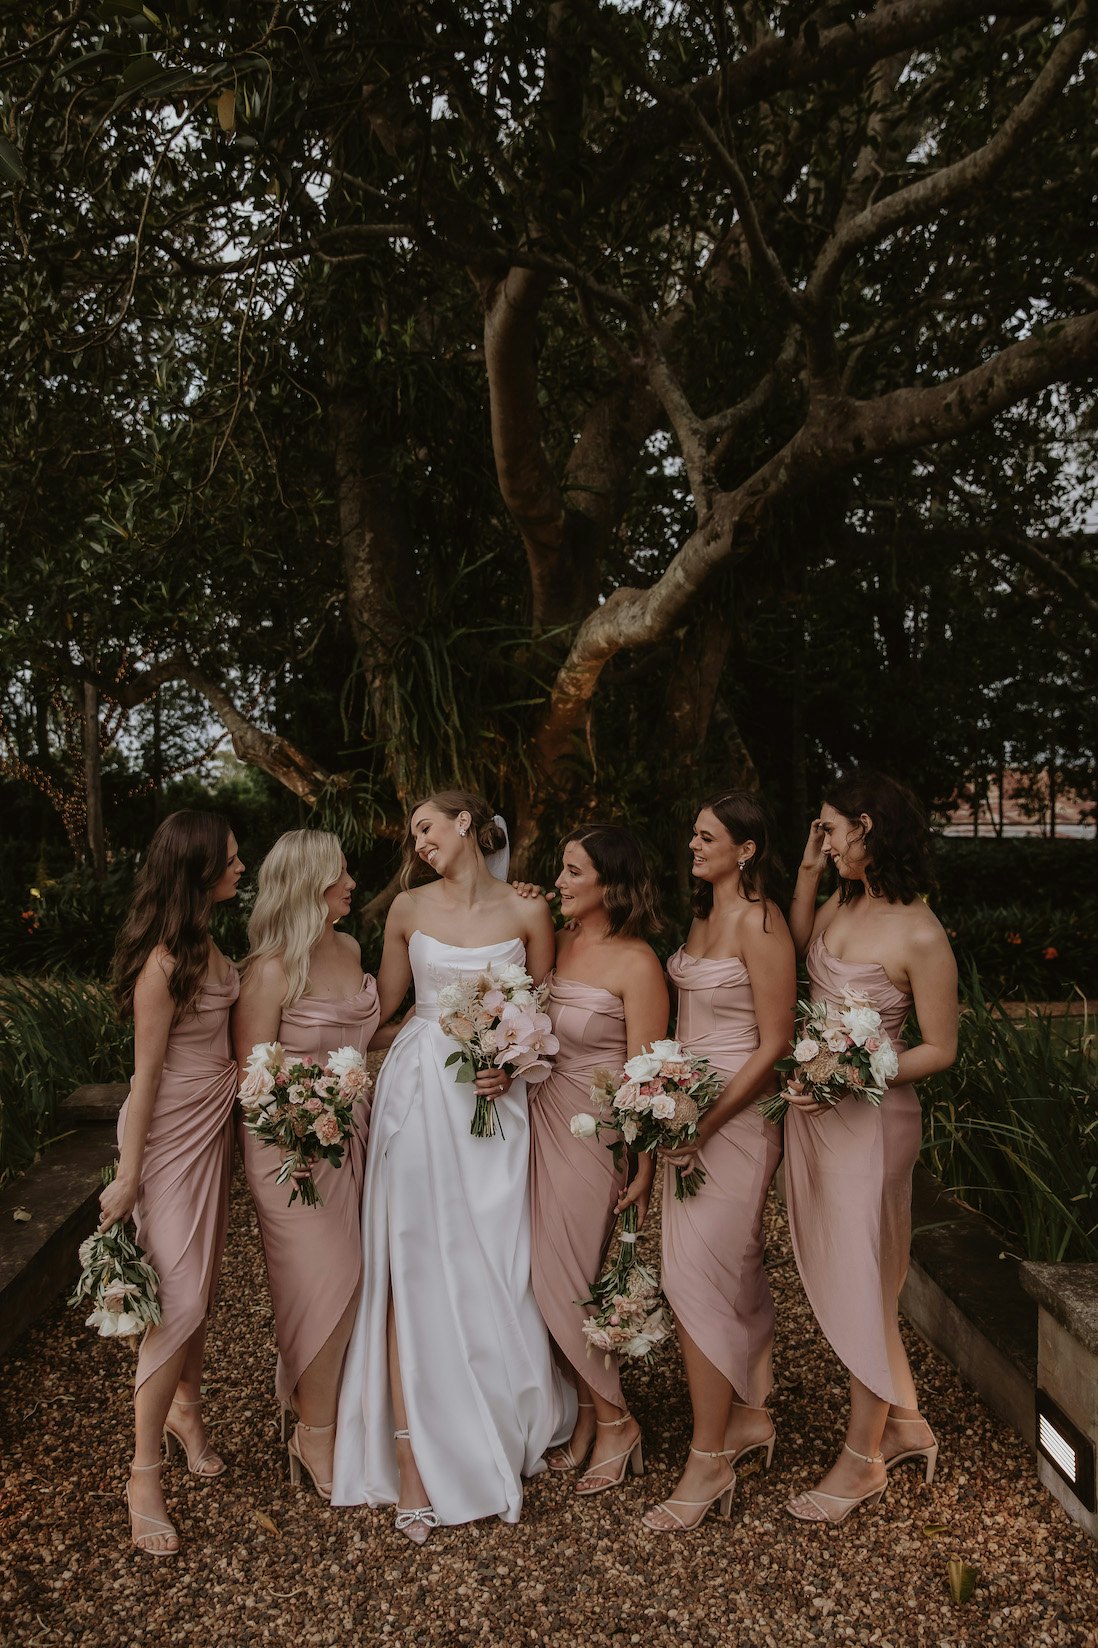 Brides and bridesmaids holding bouquets 